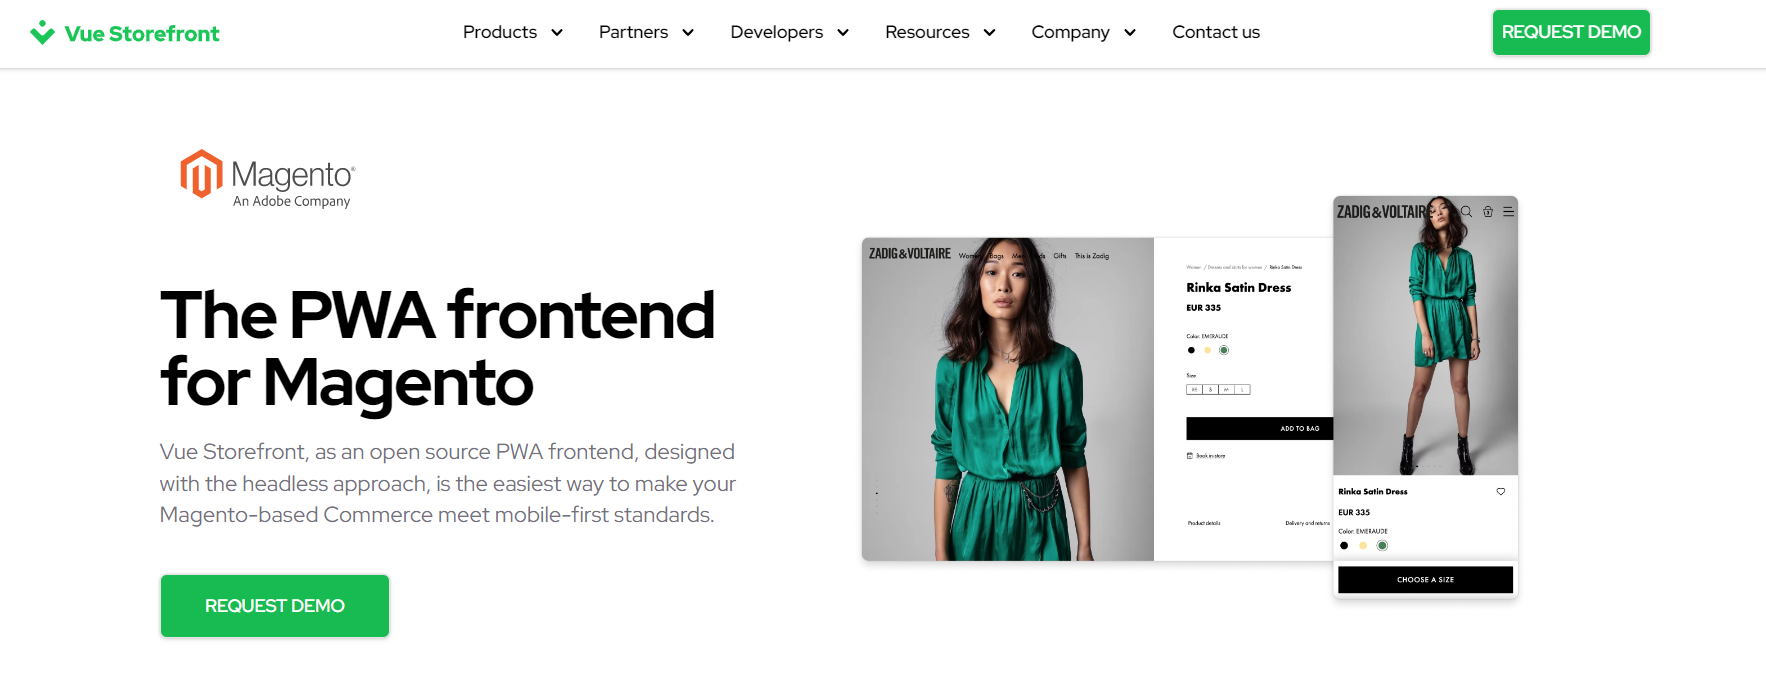 Magento PWA Theme by Vue Storefront